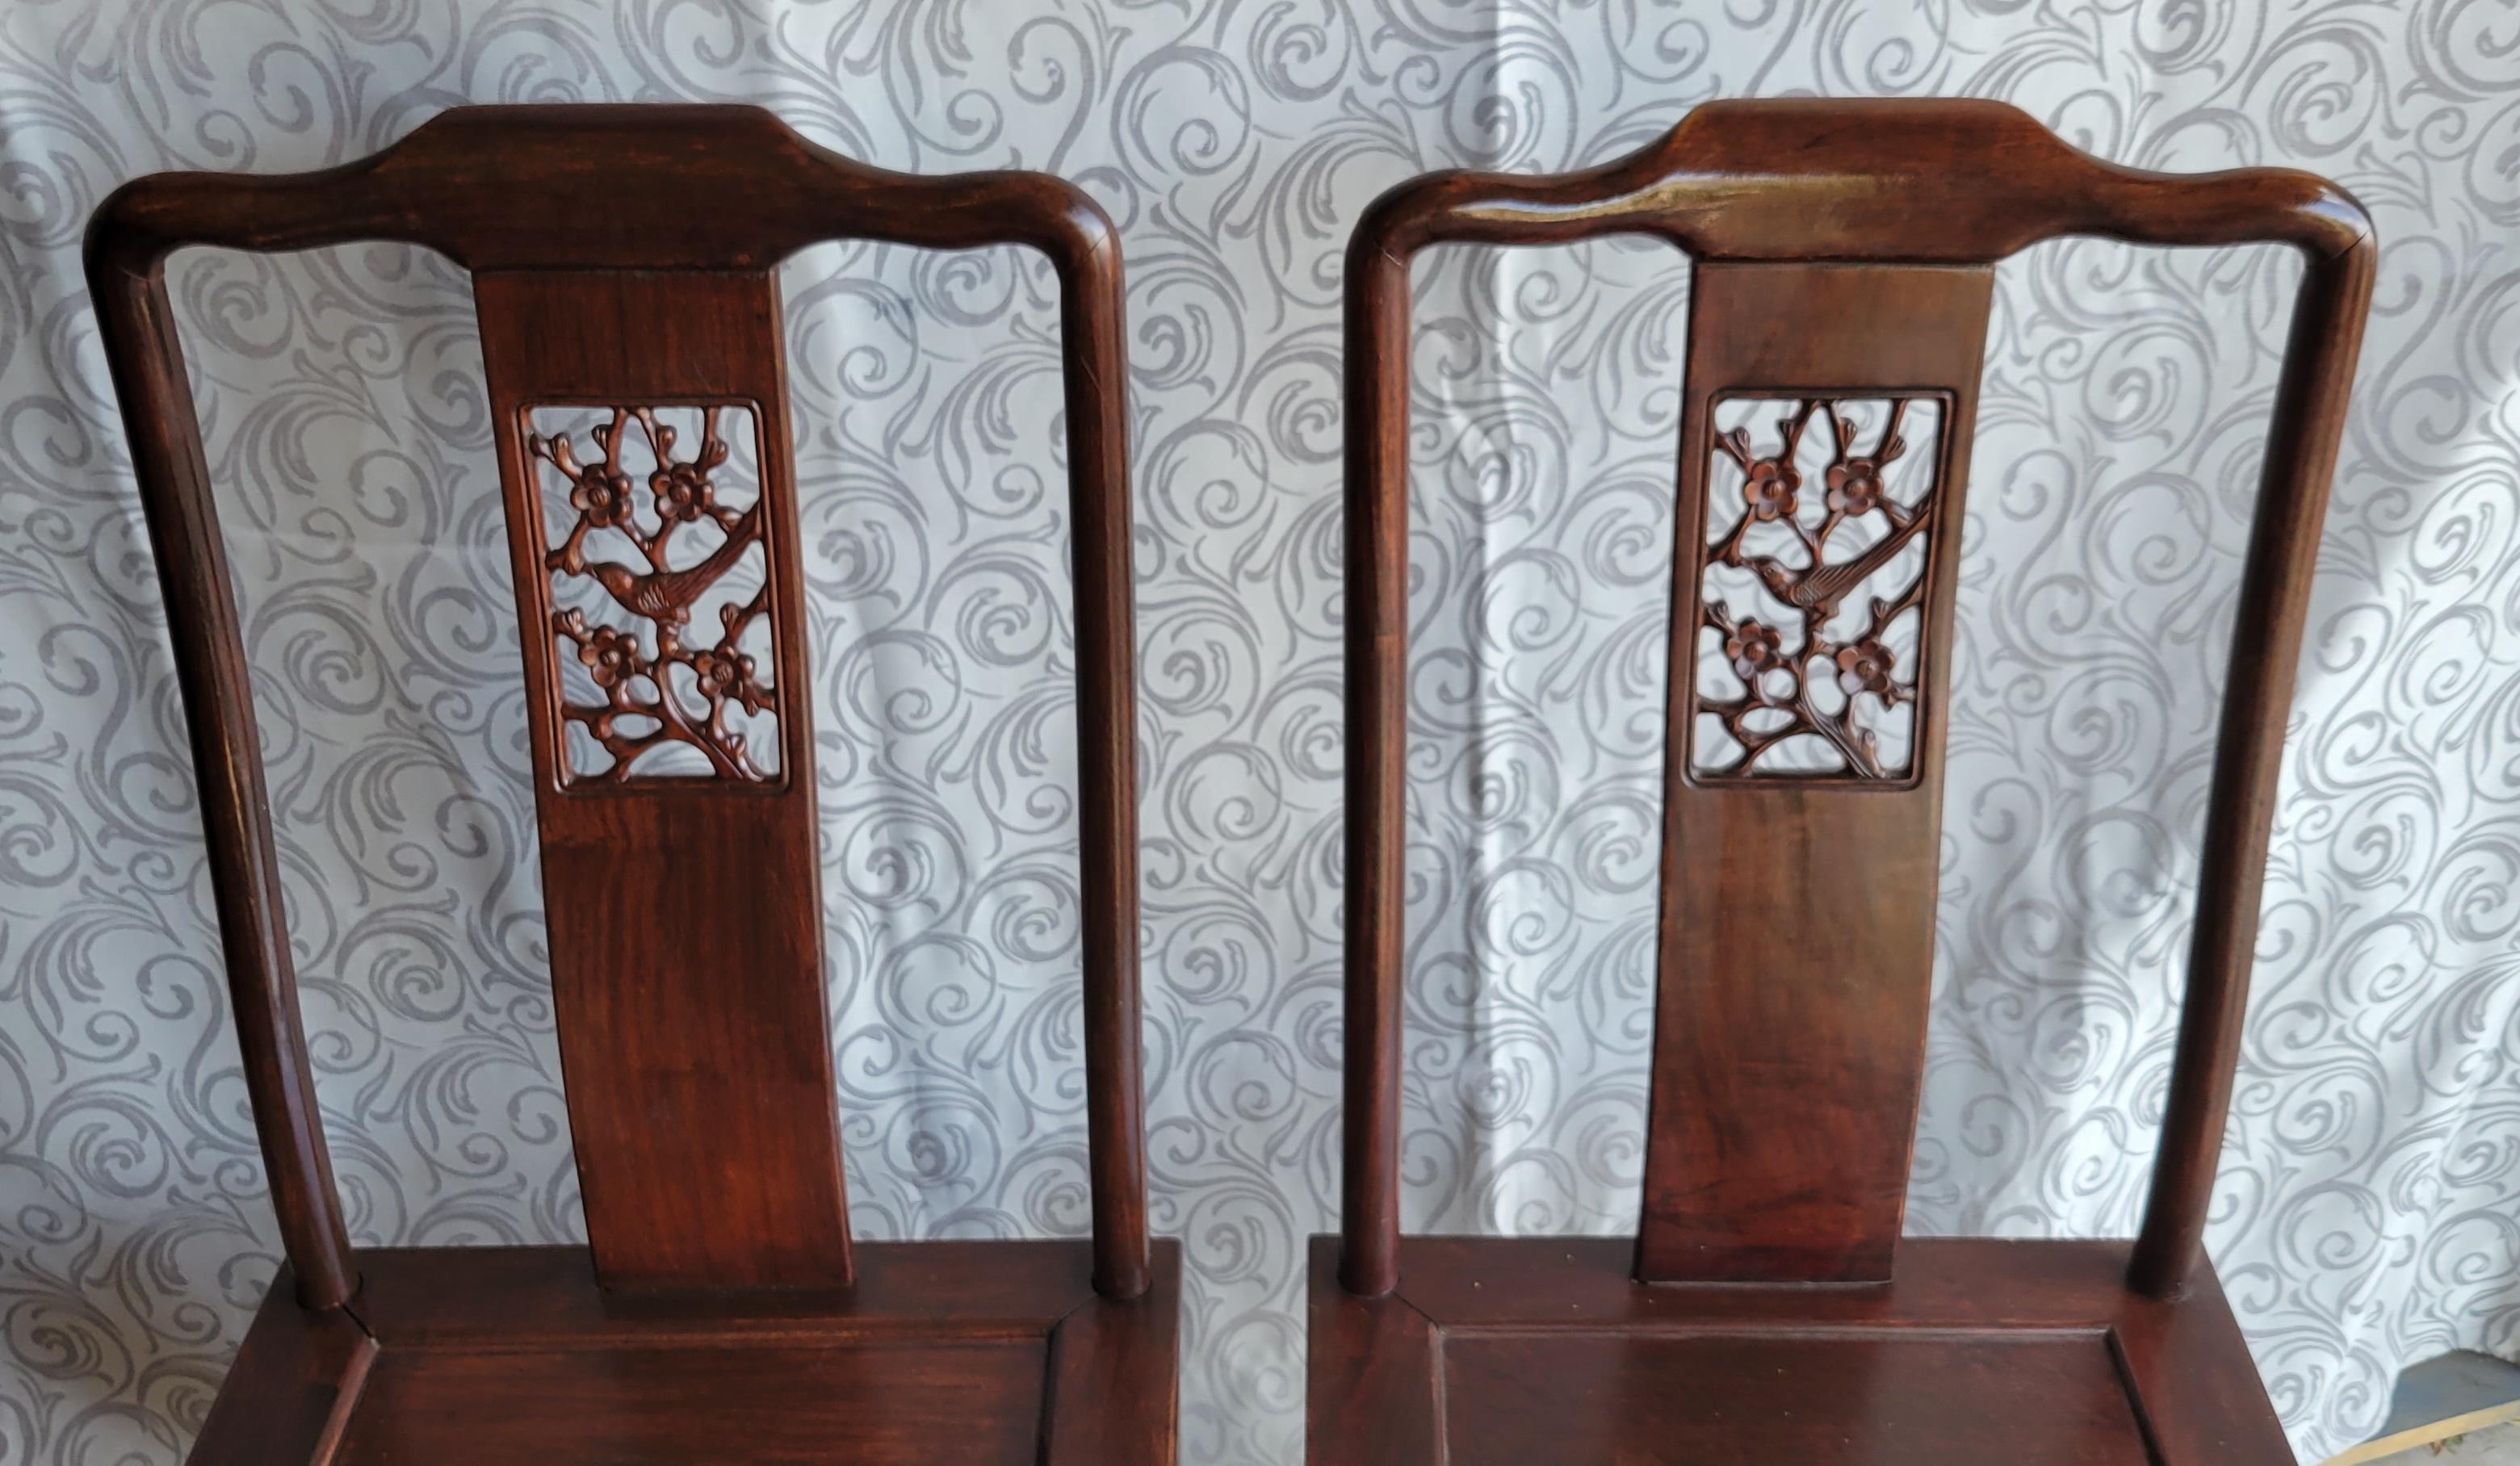 Japonisme Vintage George Zee and Co. Mahogany Side Chairs - set of 2 For Sale